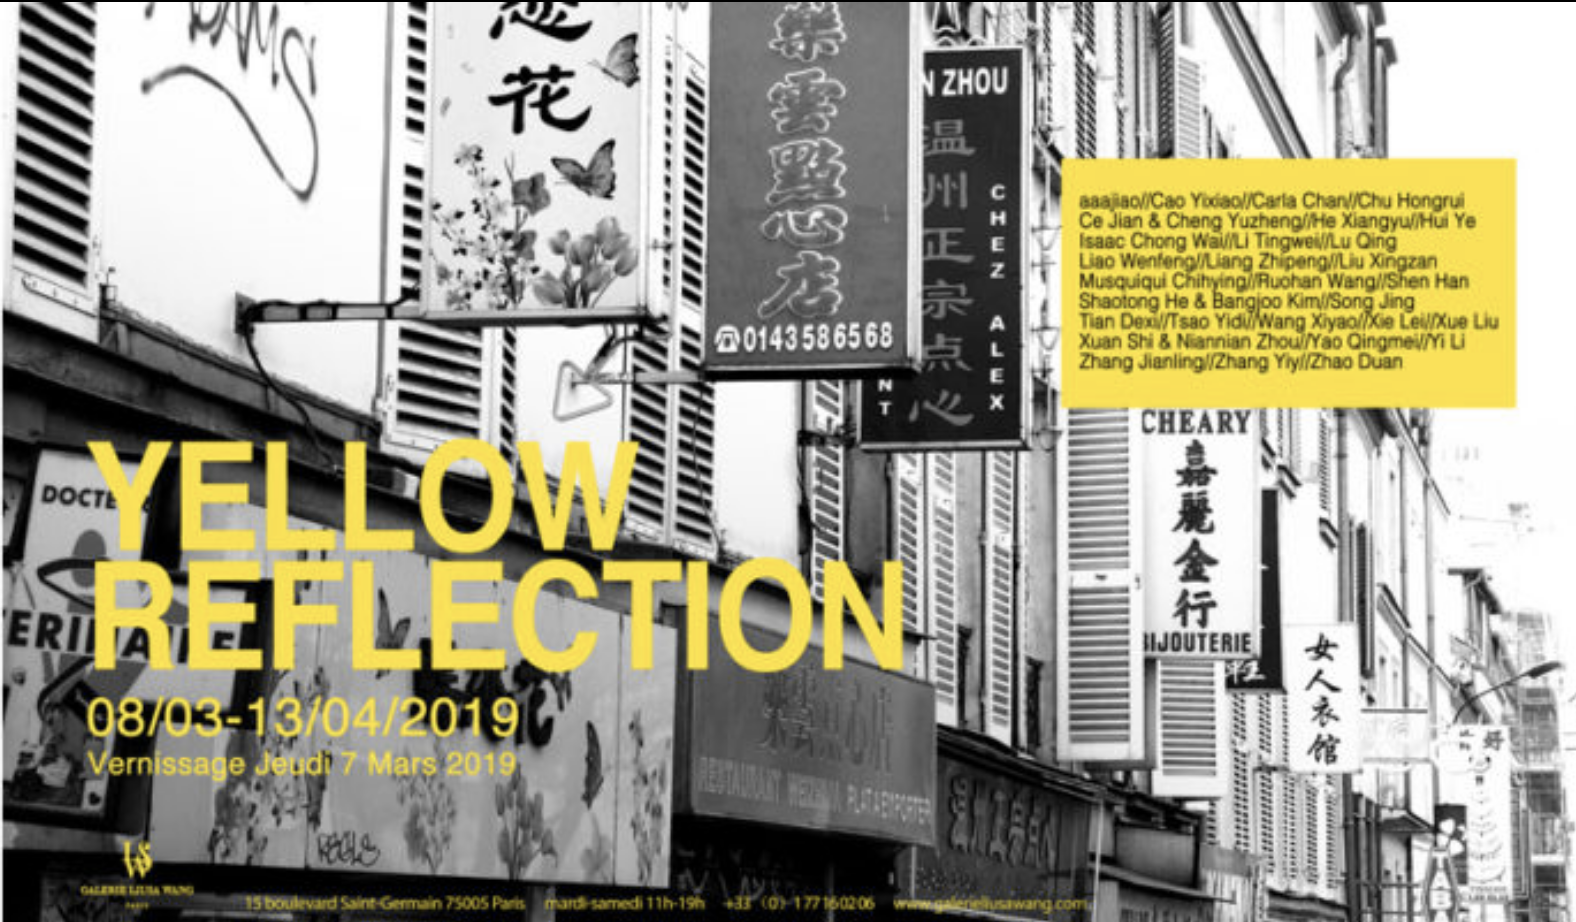 "Yellow reflection", exposition collective et manifestation 2019, Galerie Liusa Wang